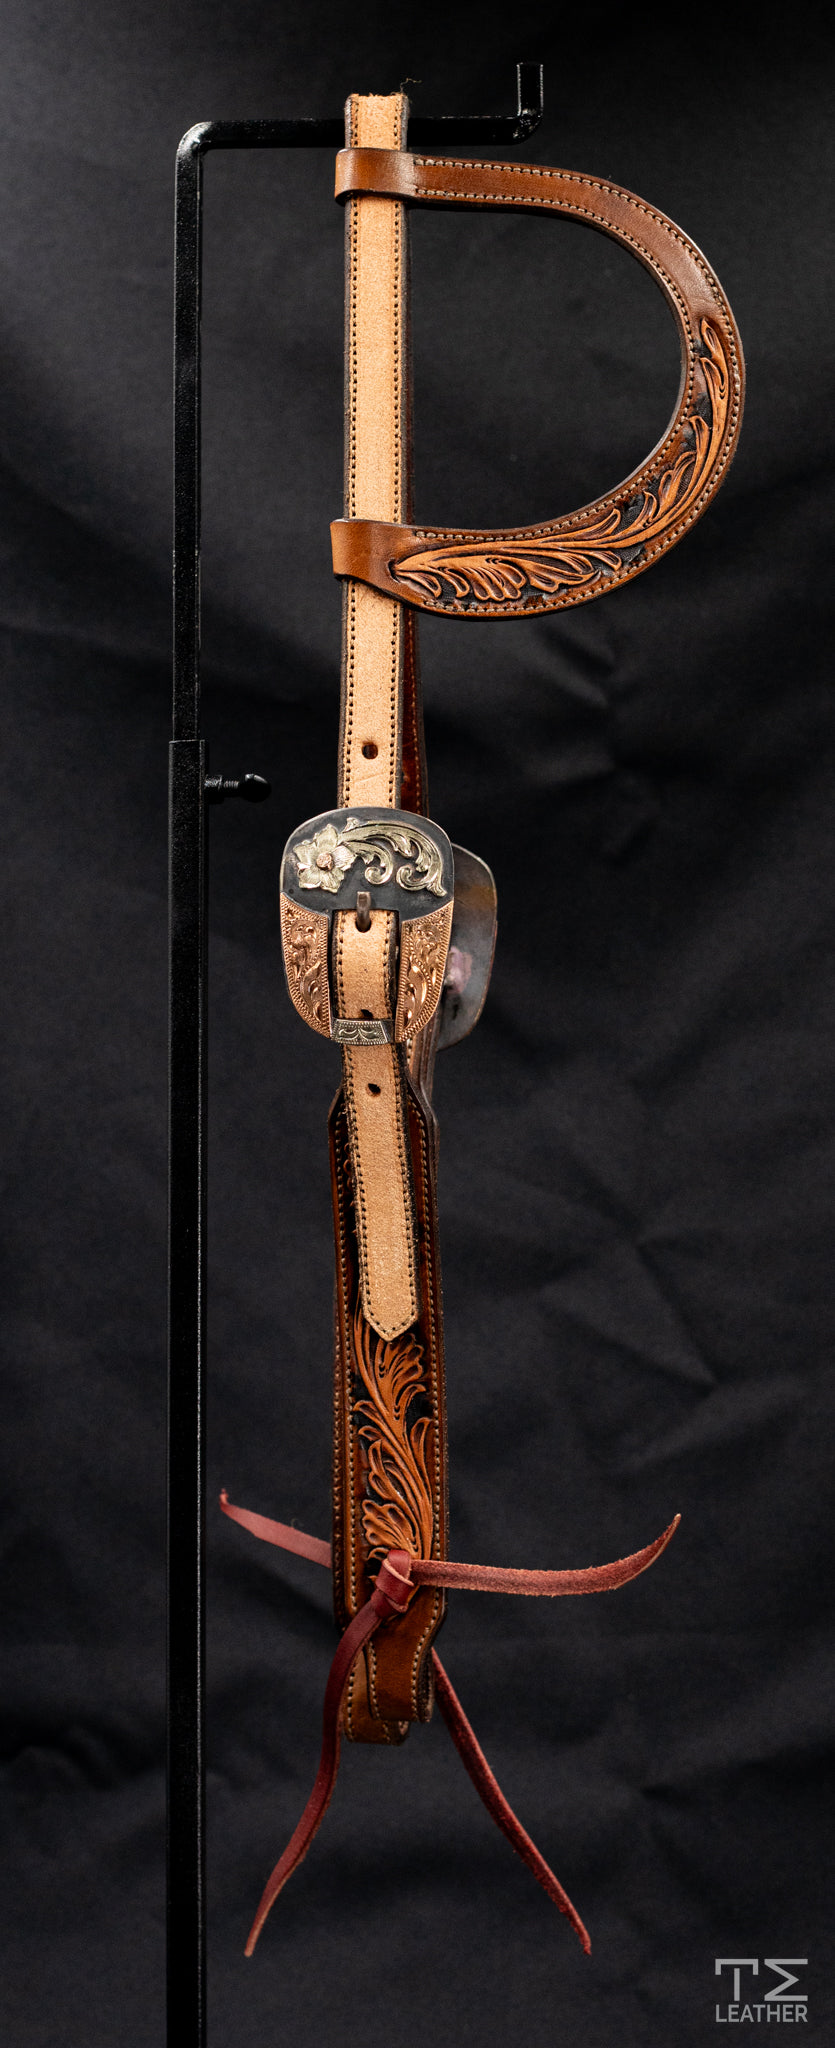 Slide Ear Brown & Black w/ Roughout & Steel Rounded Square Buckle w/ Copper & Floral Accents